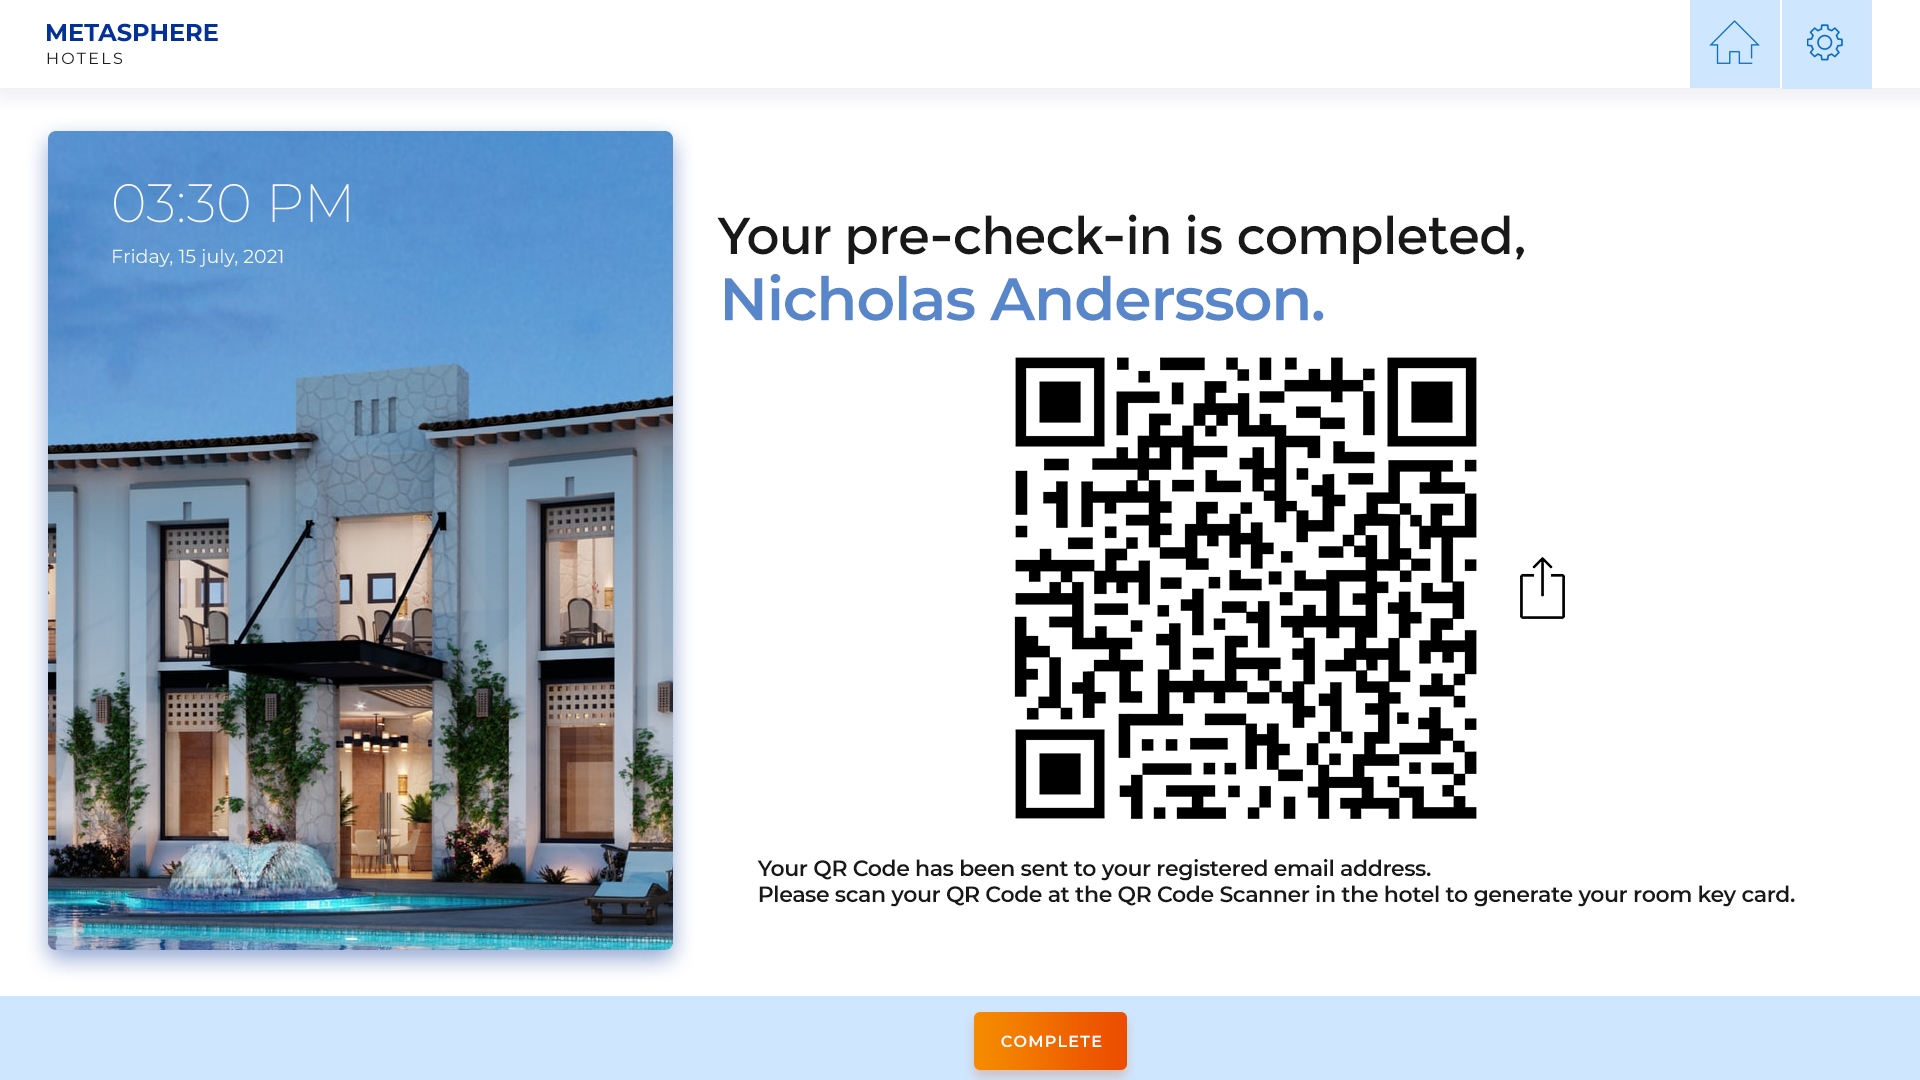 Metasphere Self Check-In Hub product image 3